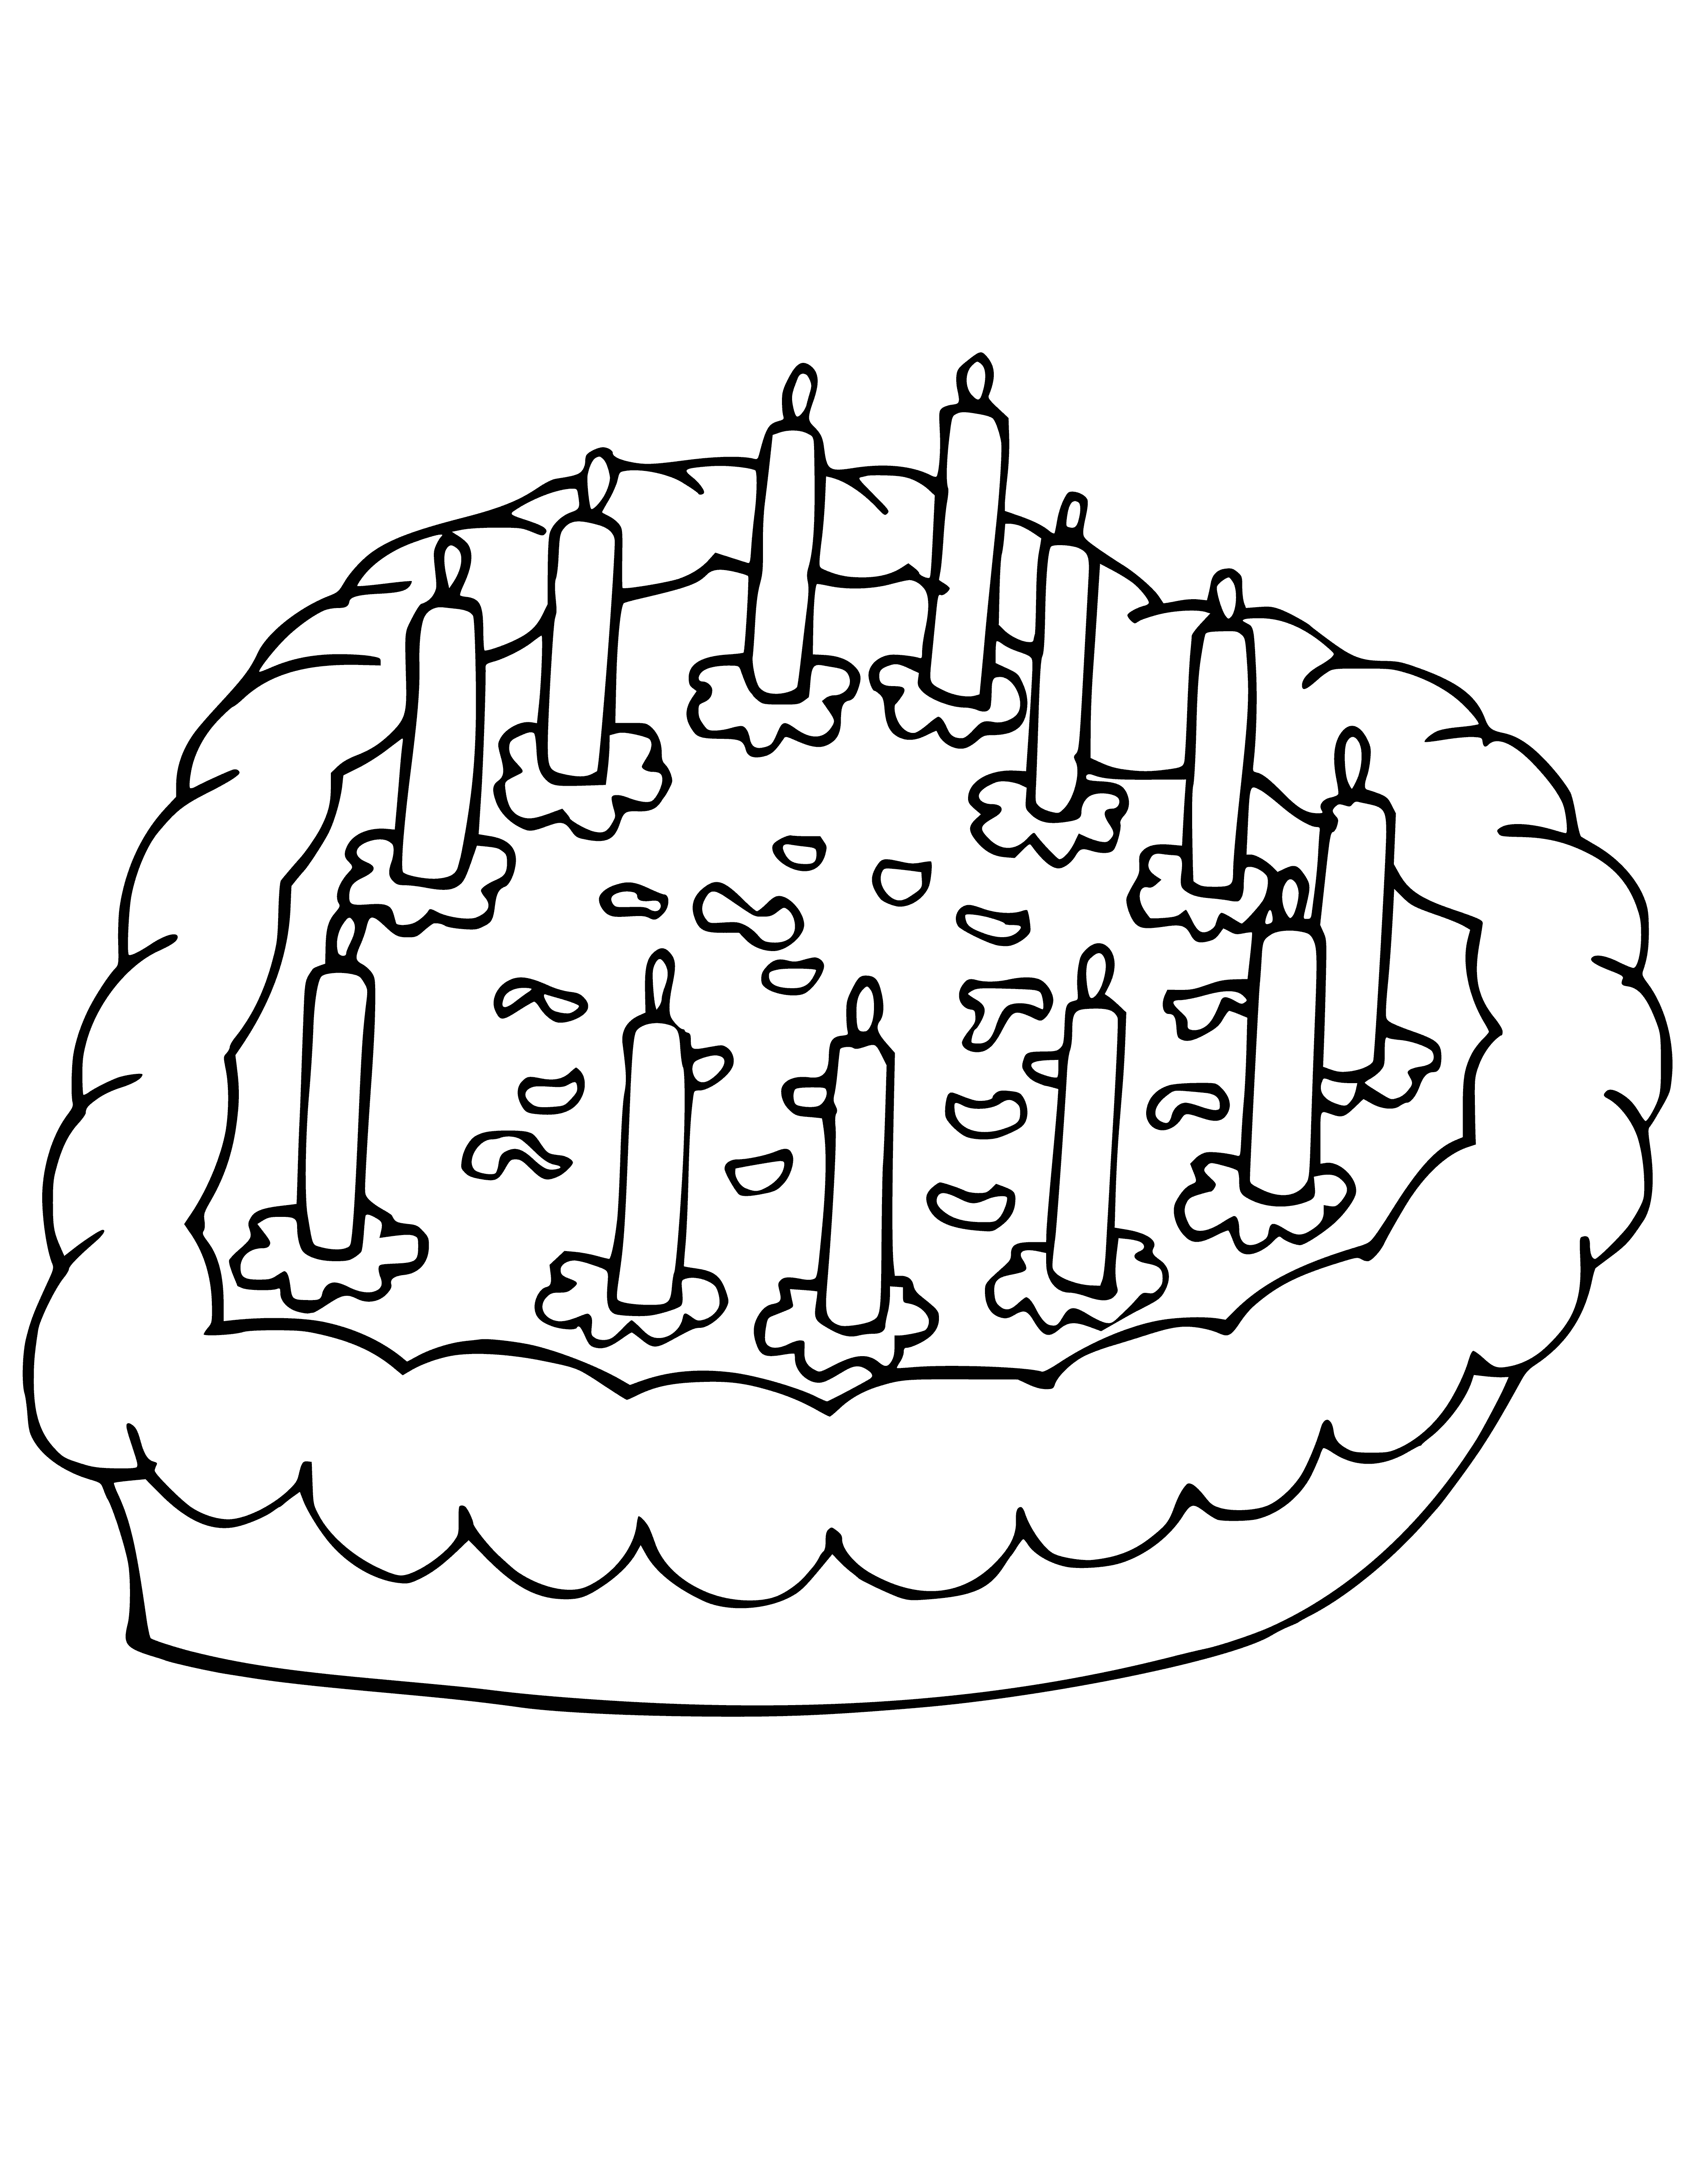 Cake for Valentine's Day coloring page